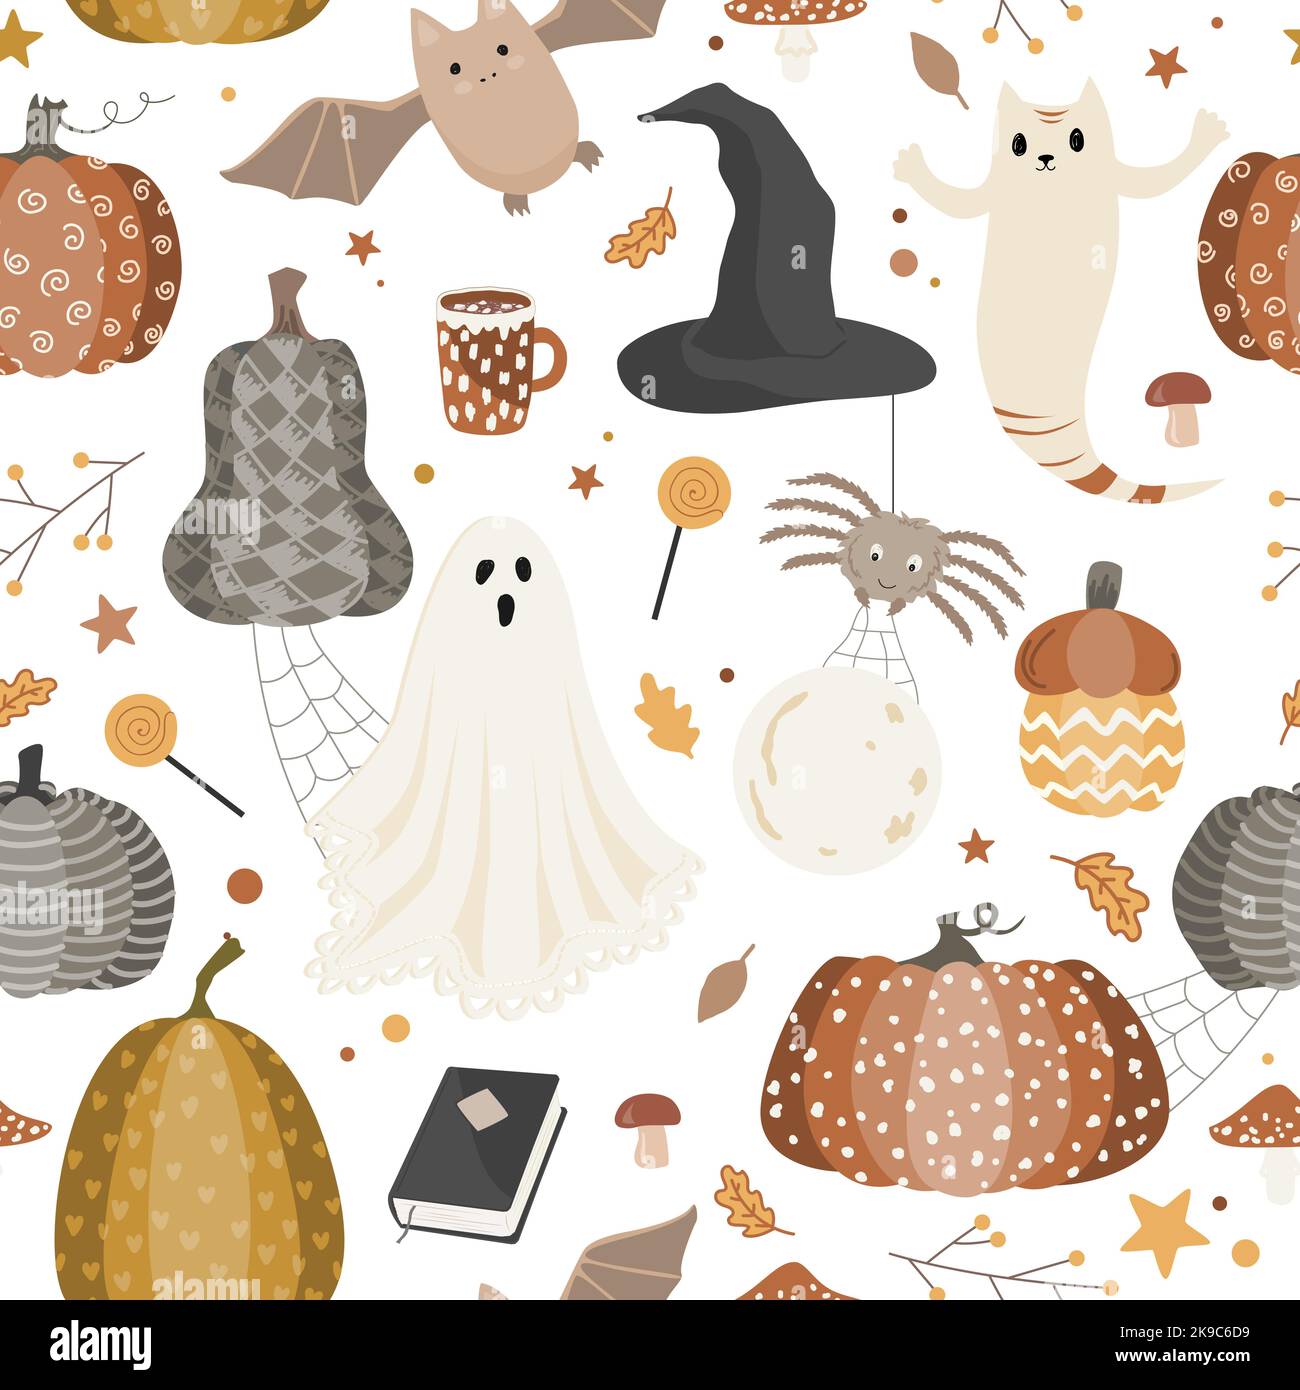 Halloween seamless pattern design with ghost, pumpkins, bat, and leaves. Vector illustration. Stock Vector